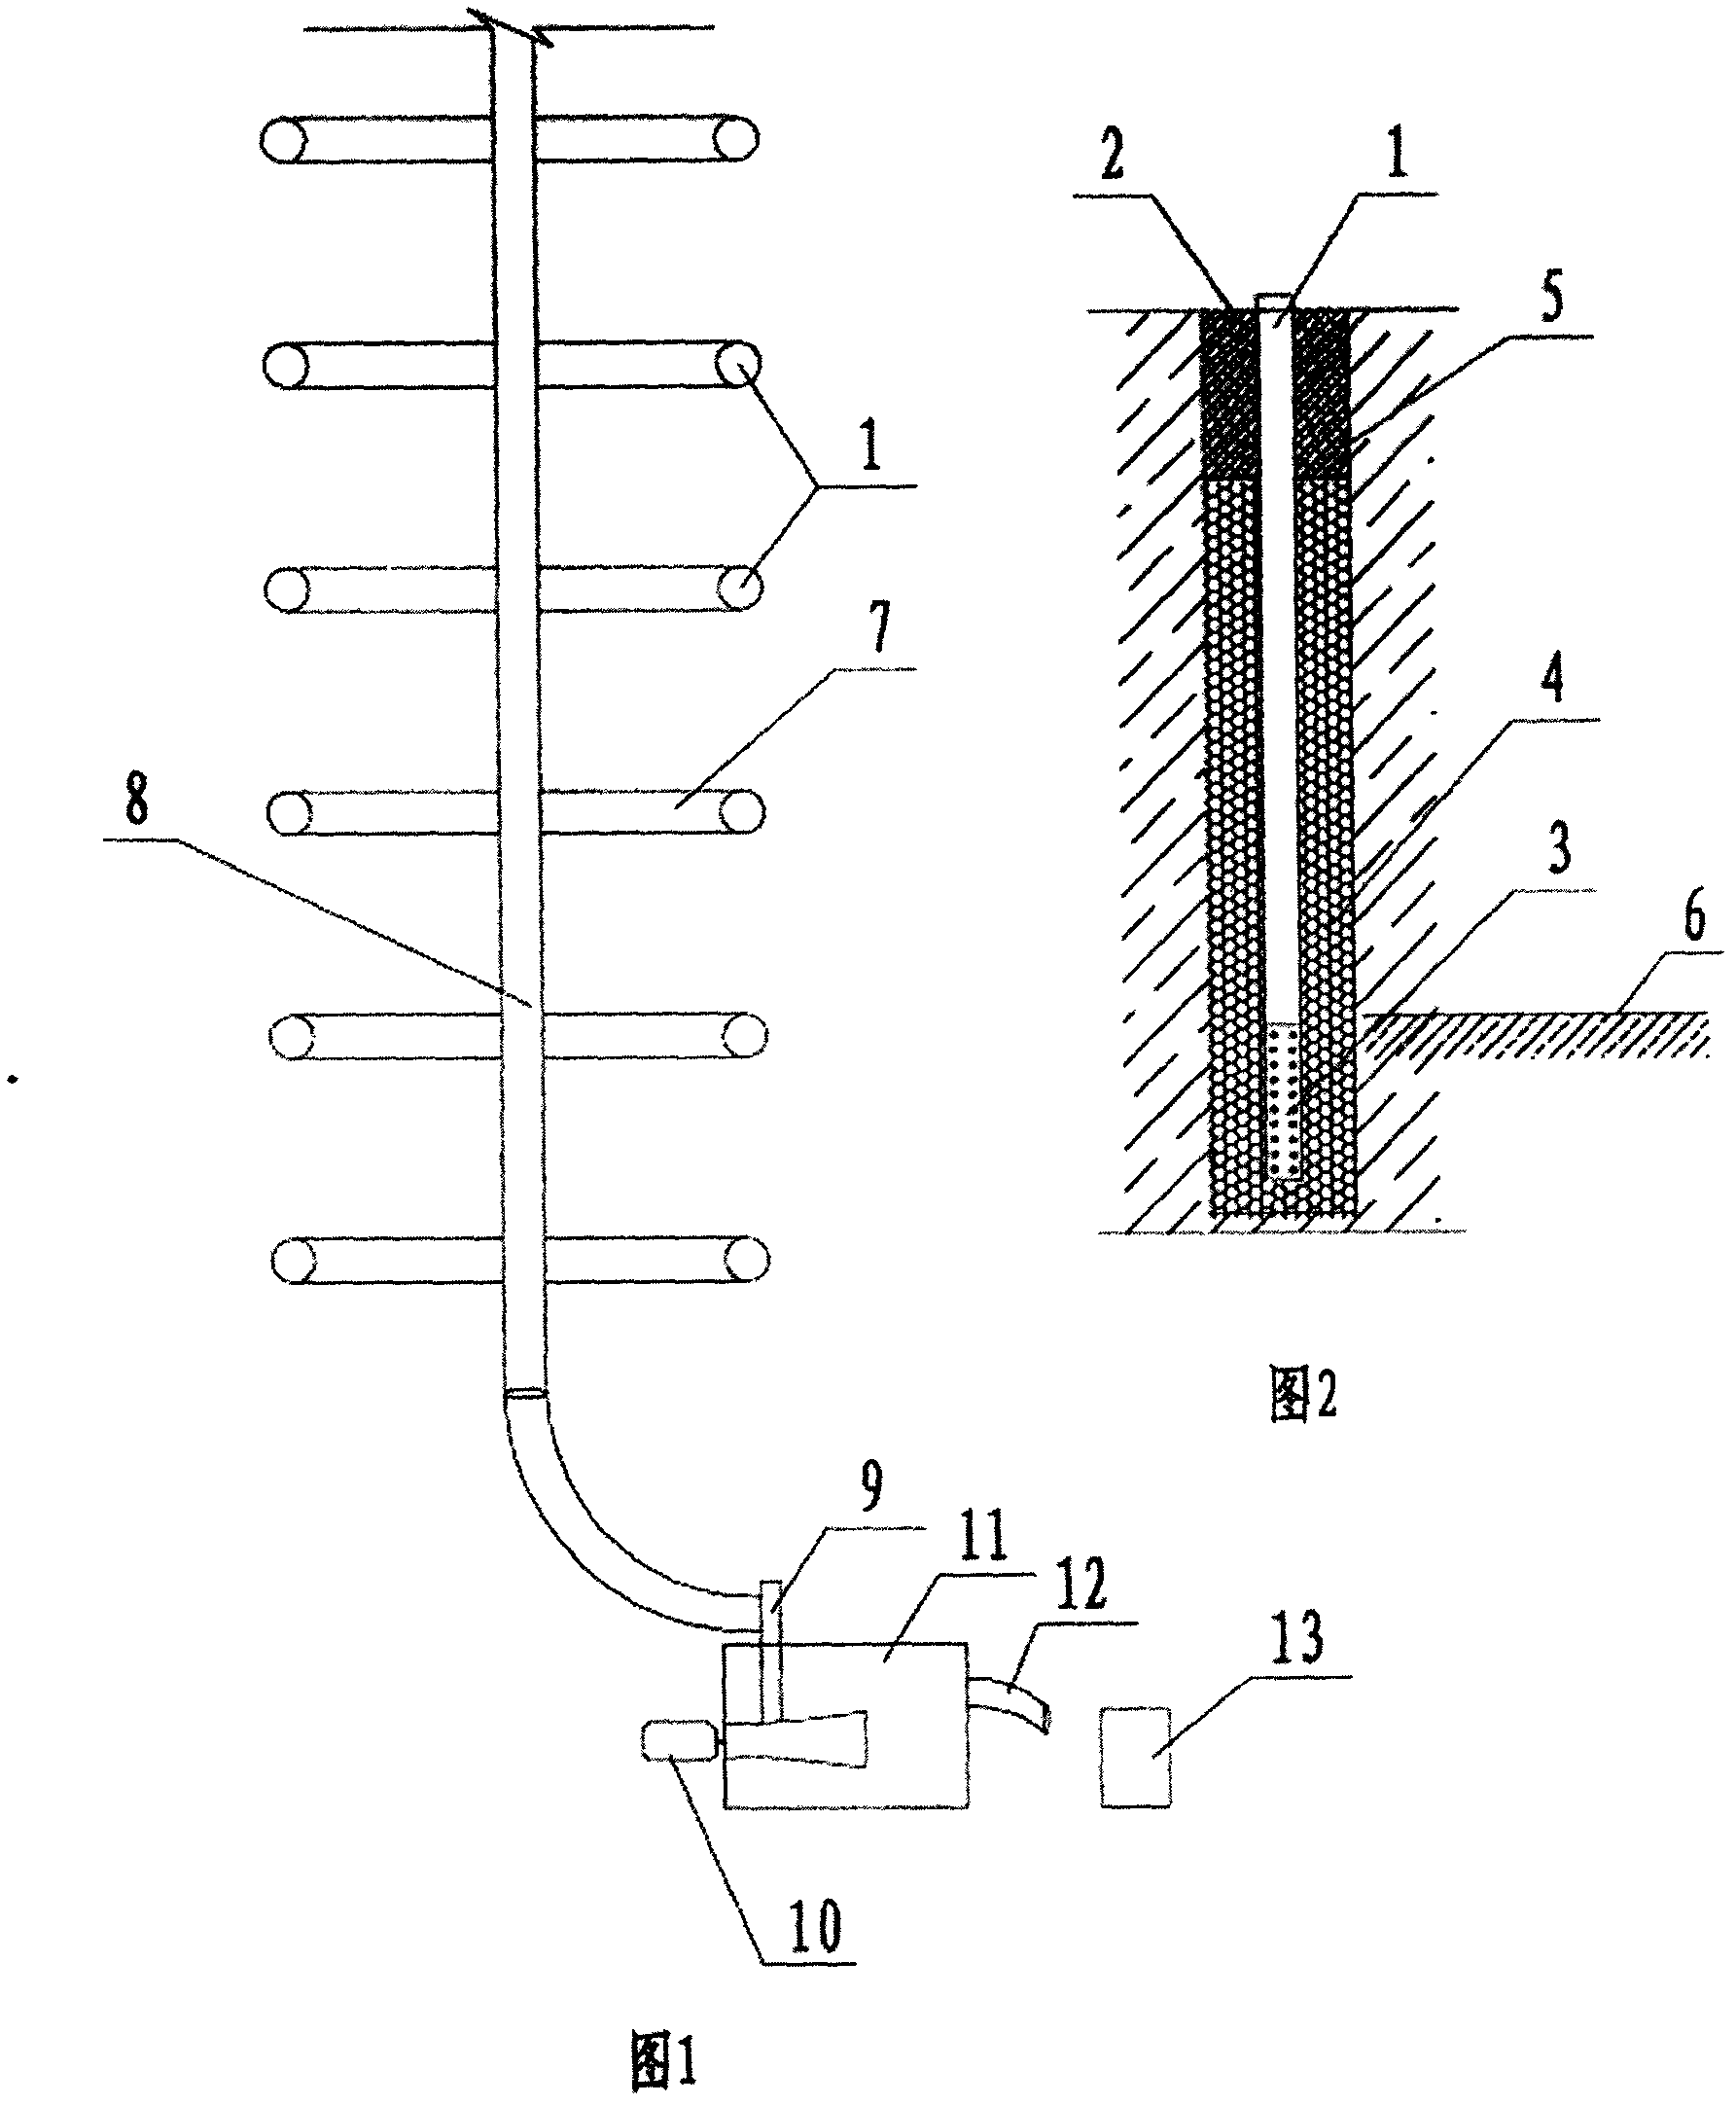 Method for dewatering large-area foundation pit on silt stratum